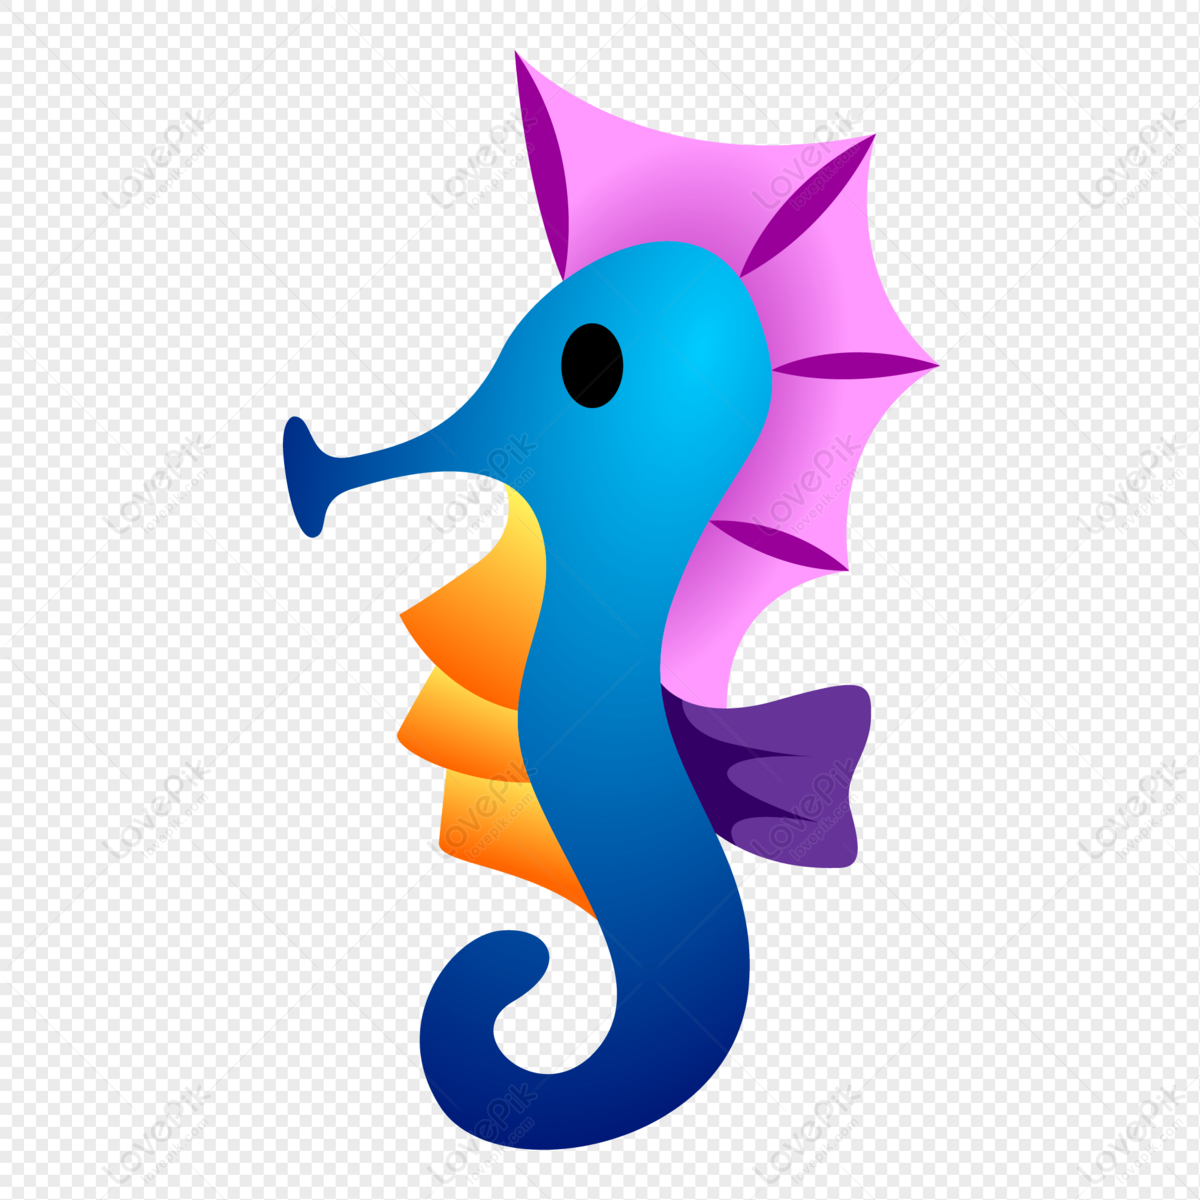 Seahorse PNG Free Download And Clipart Image For Free Download - Lovepik |  401351733